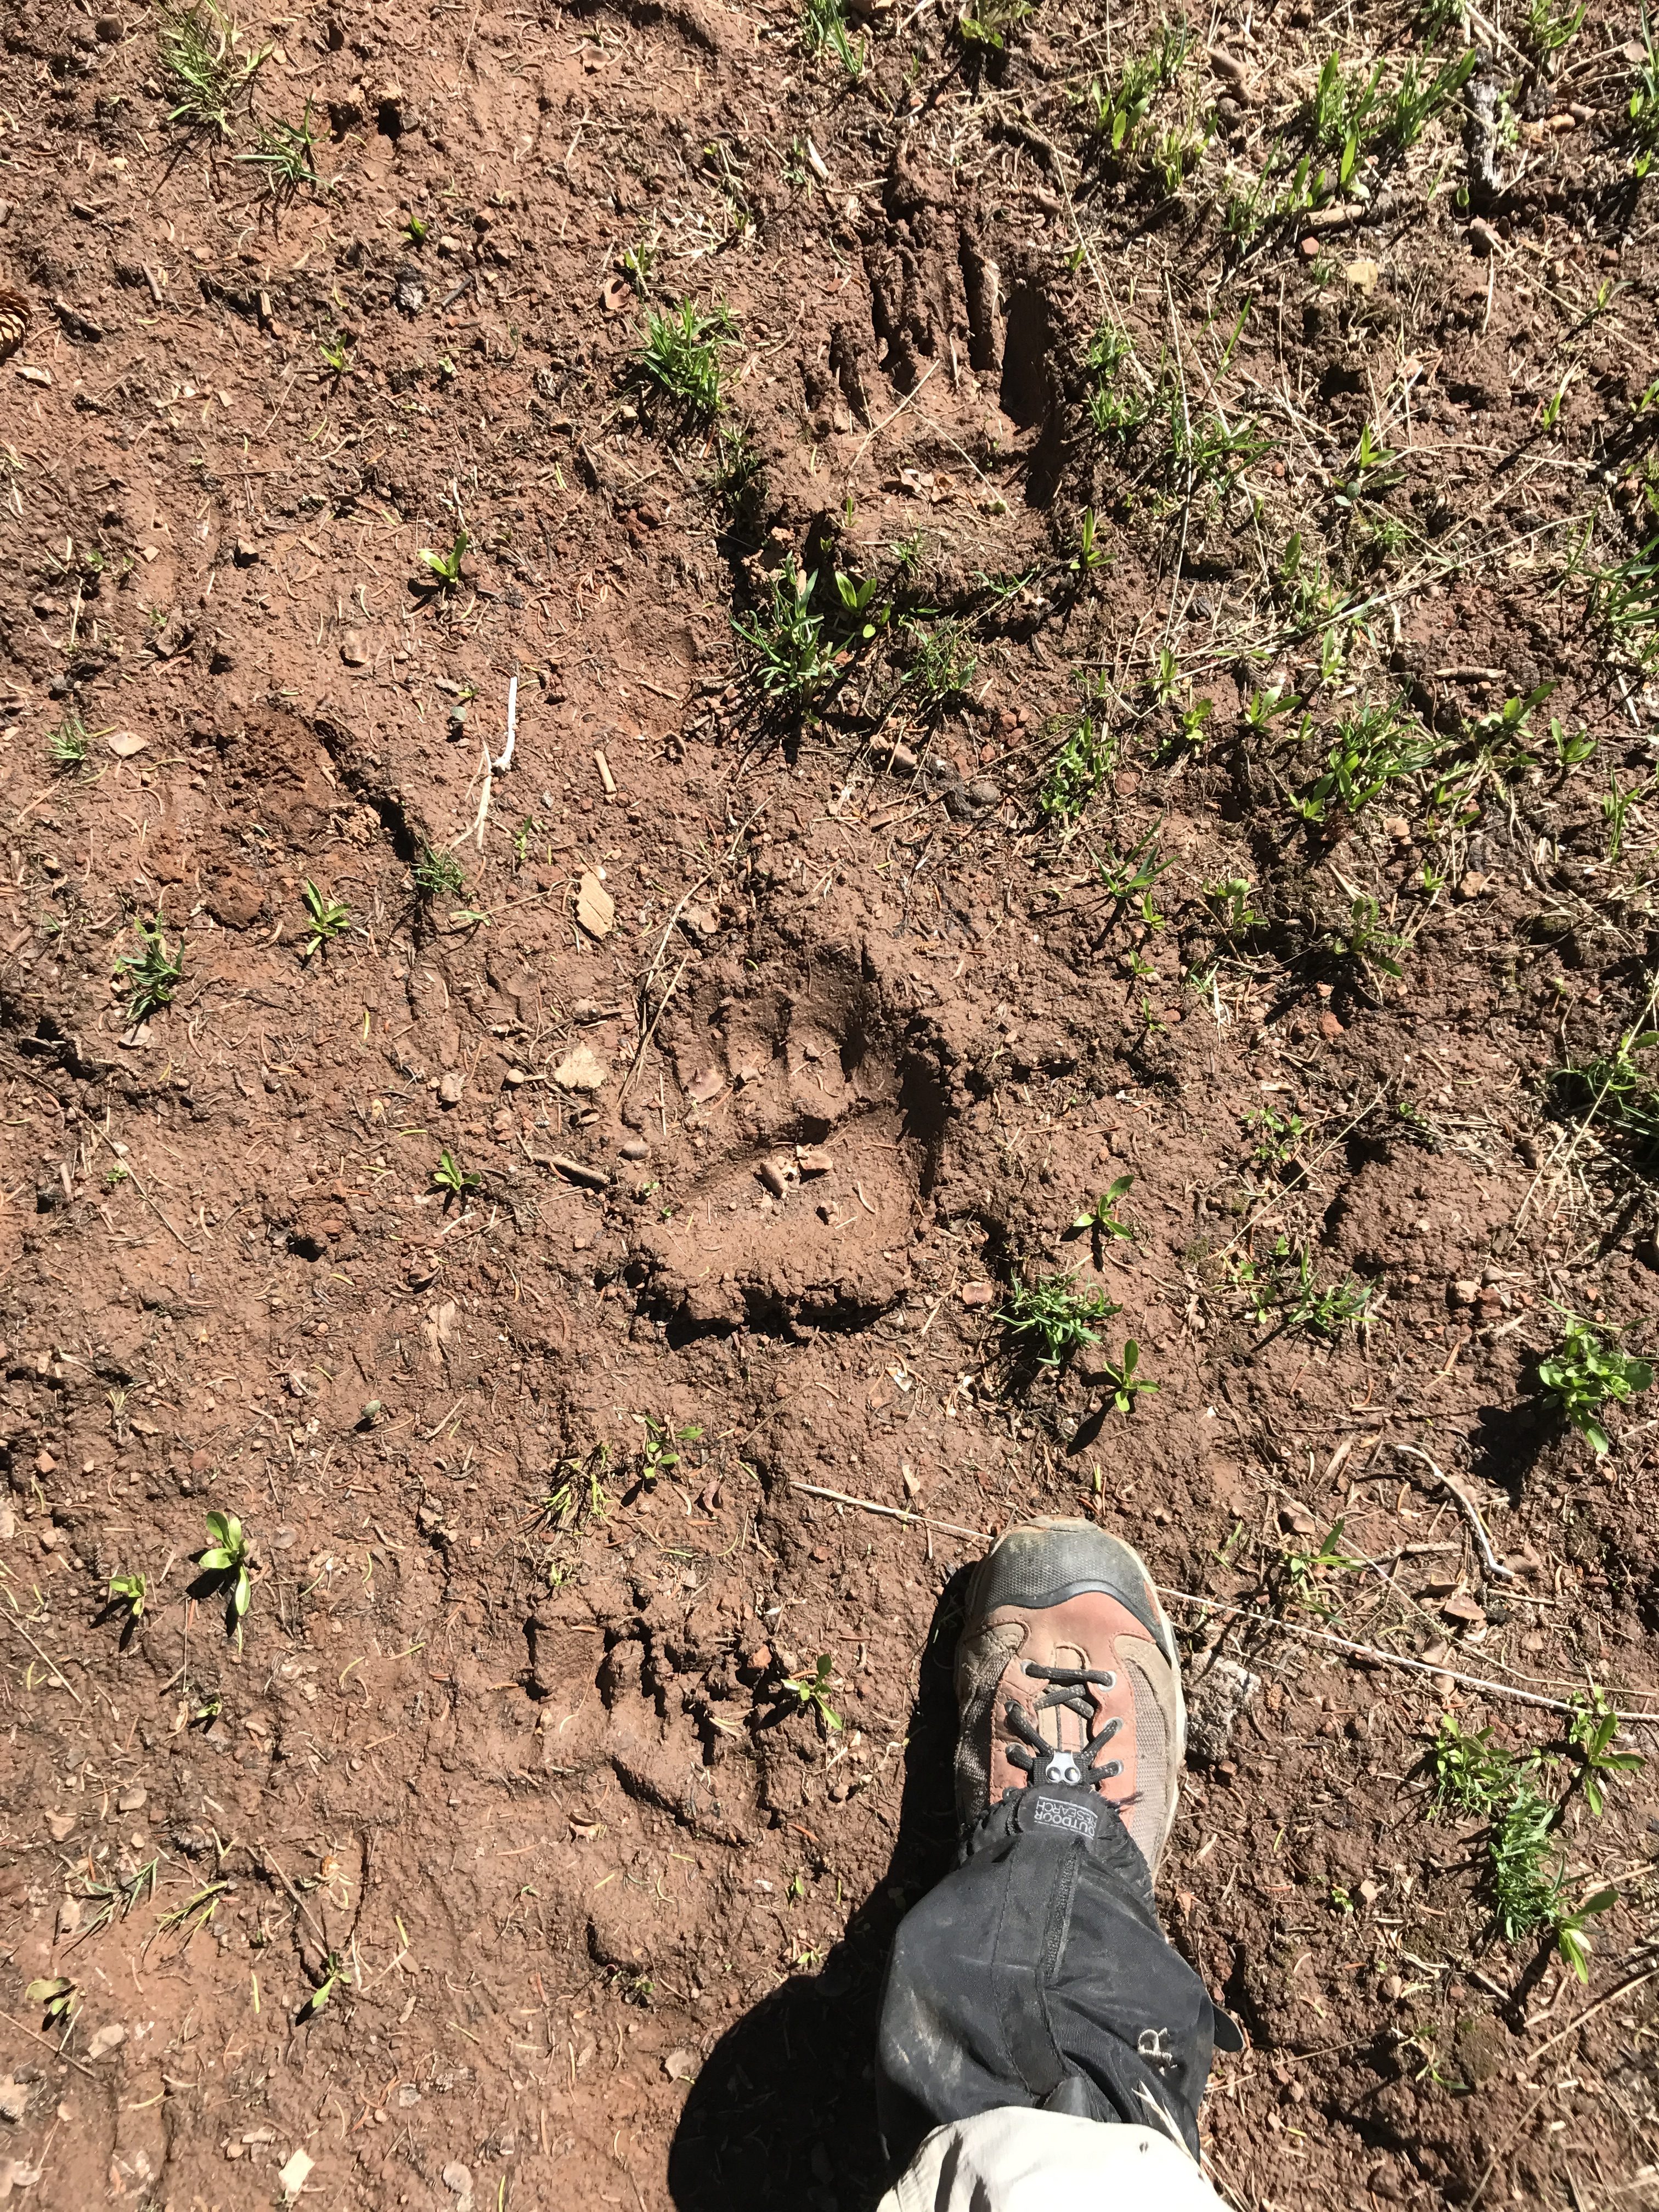 Grizzly bear paw prints next to Oboz hiking boot